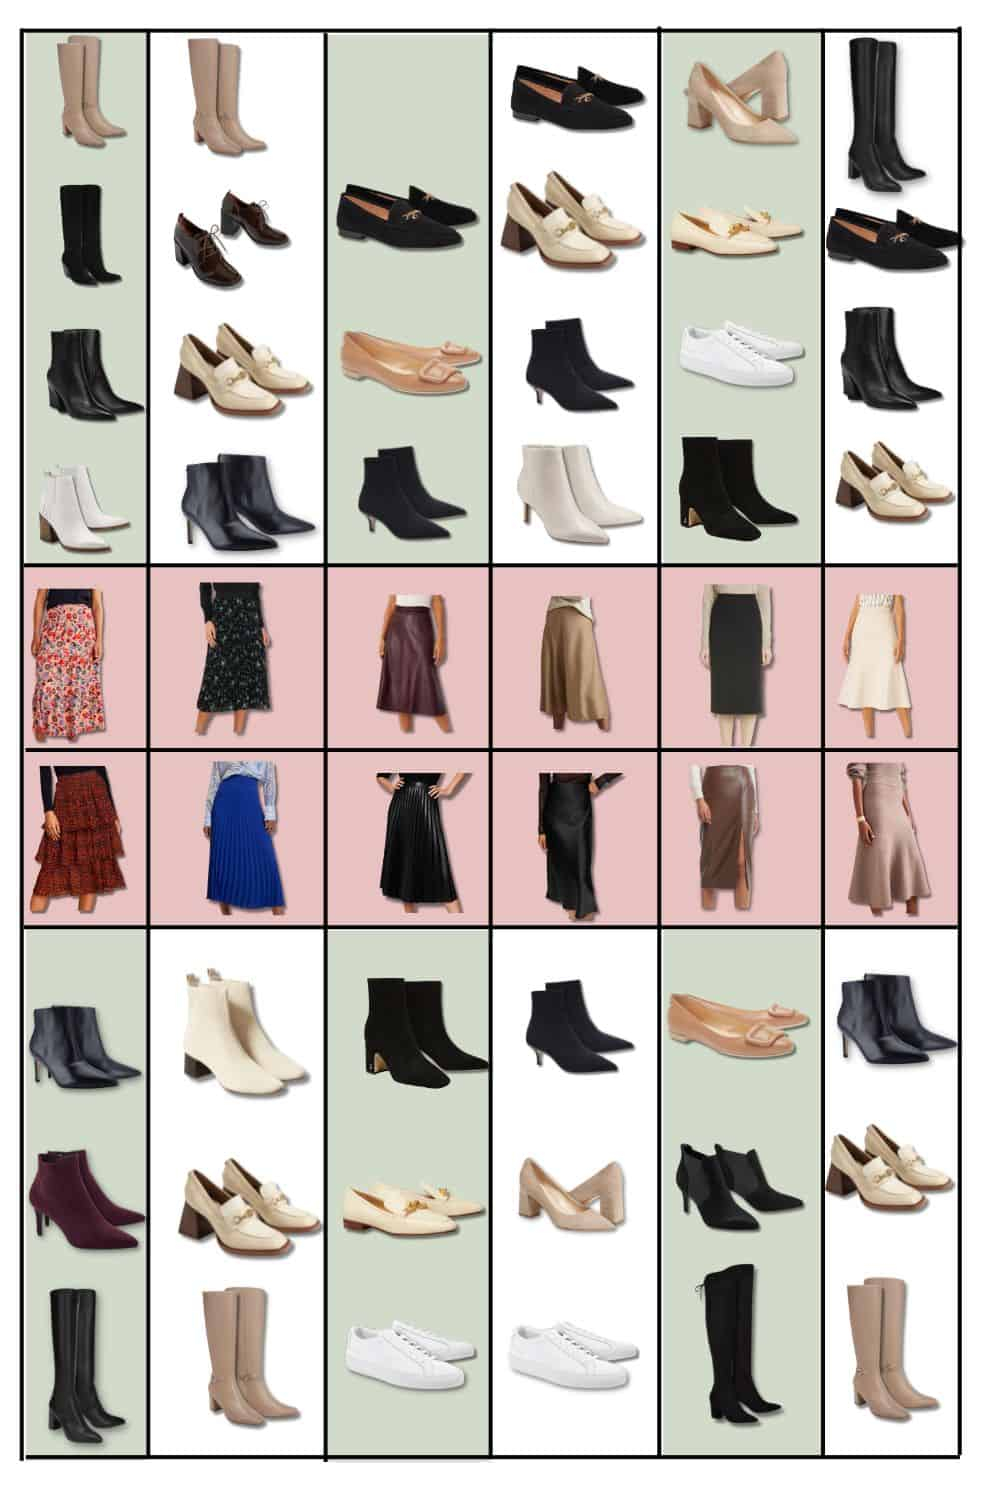 What Shoes To Wear With Midi Skirts in Winter To Look Good - Blog Banner